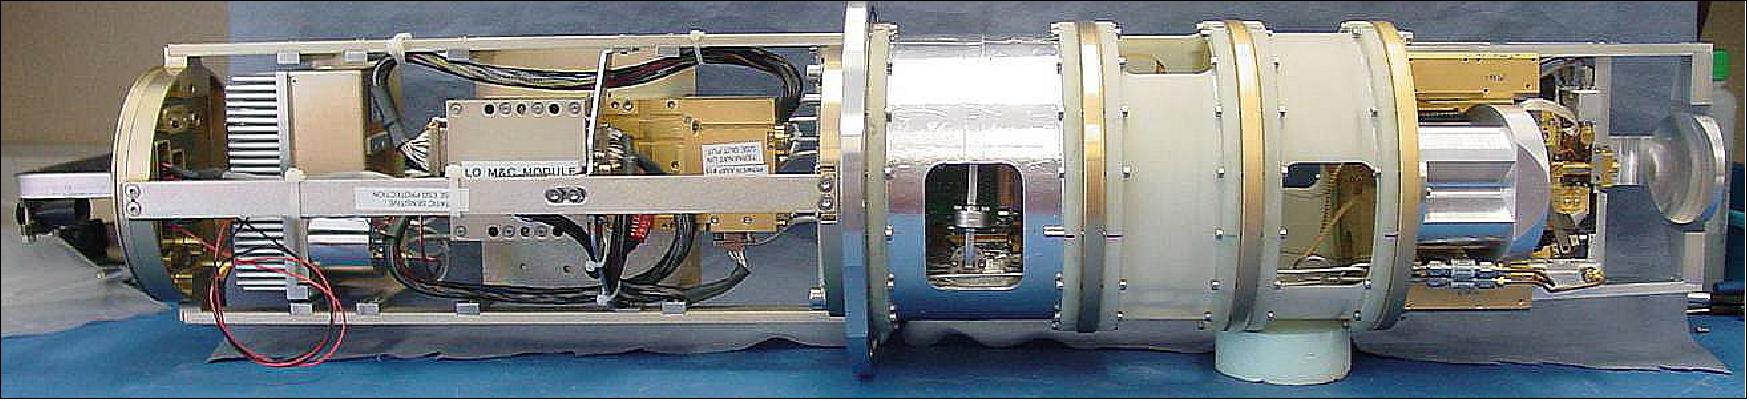 Figure 10: Example of a, Band 6, receiver cartridge. The larger diameter metal plate in the middle is the boundary between cooled receiver electronics inside the cryostat (right hand side) and the room temperature electronics (left hand side), image credit: ALMA partnership)